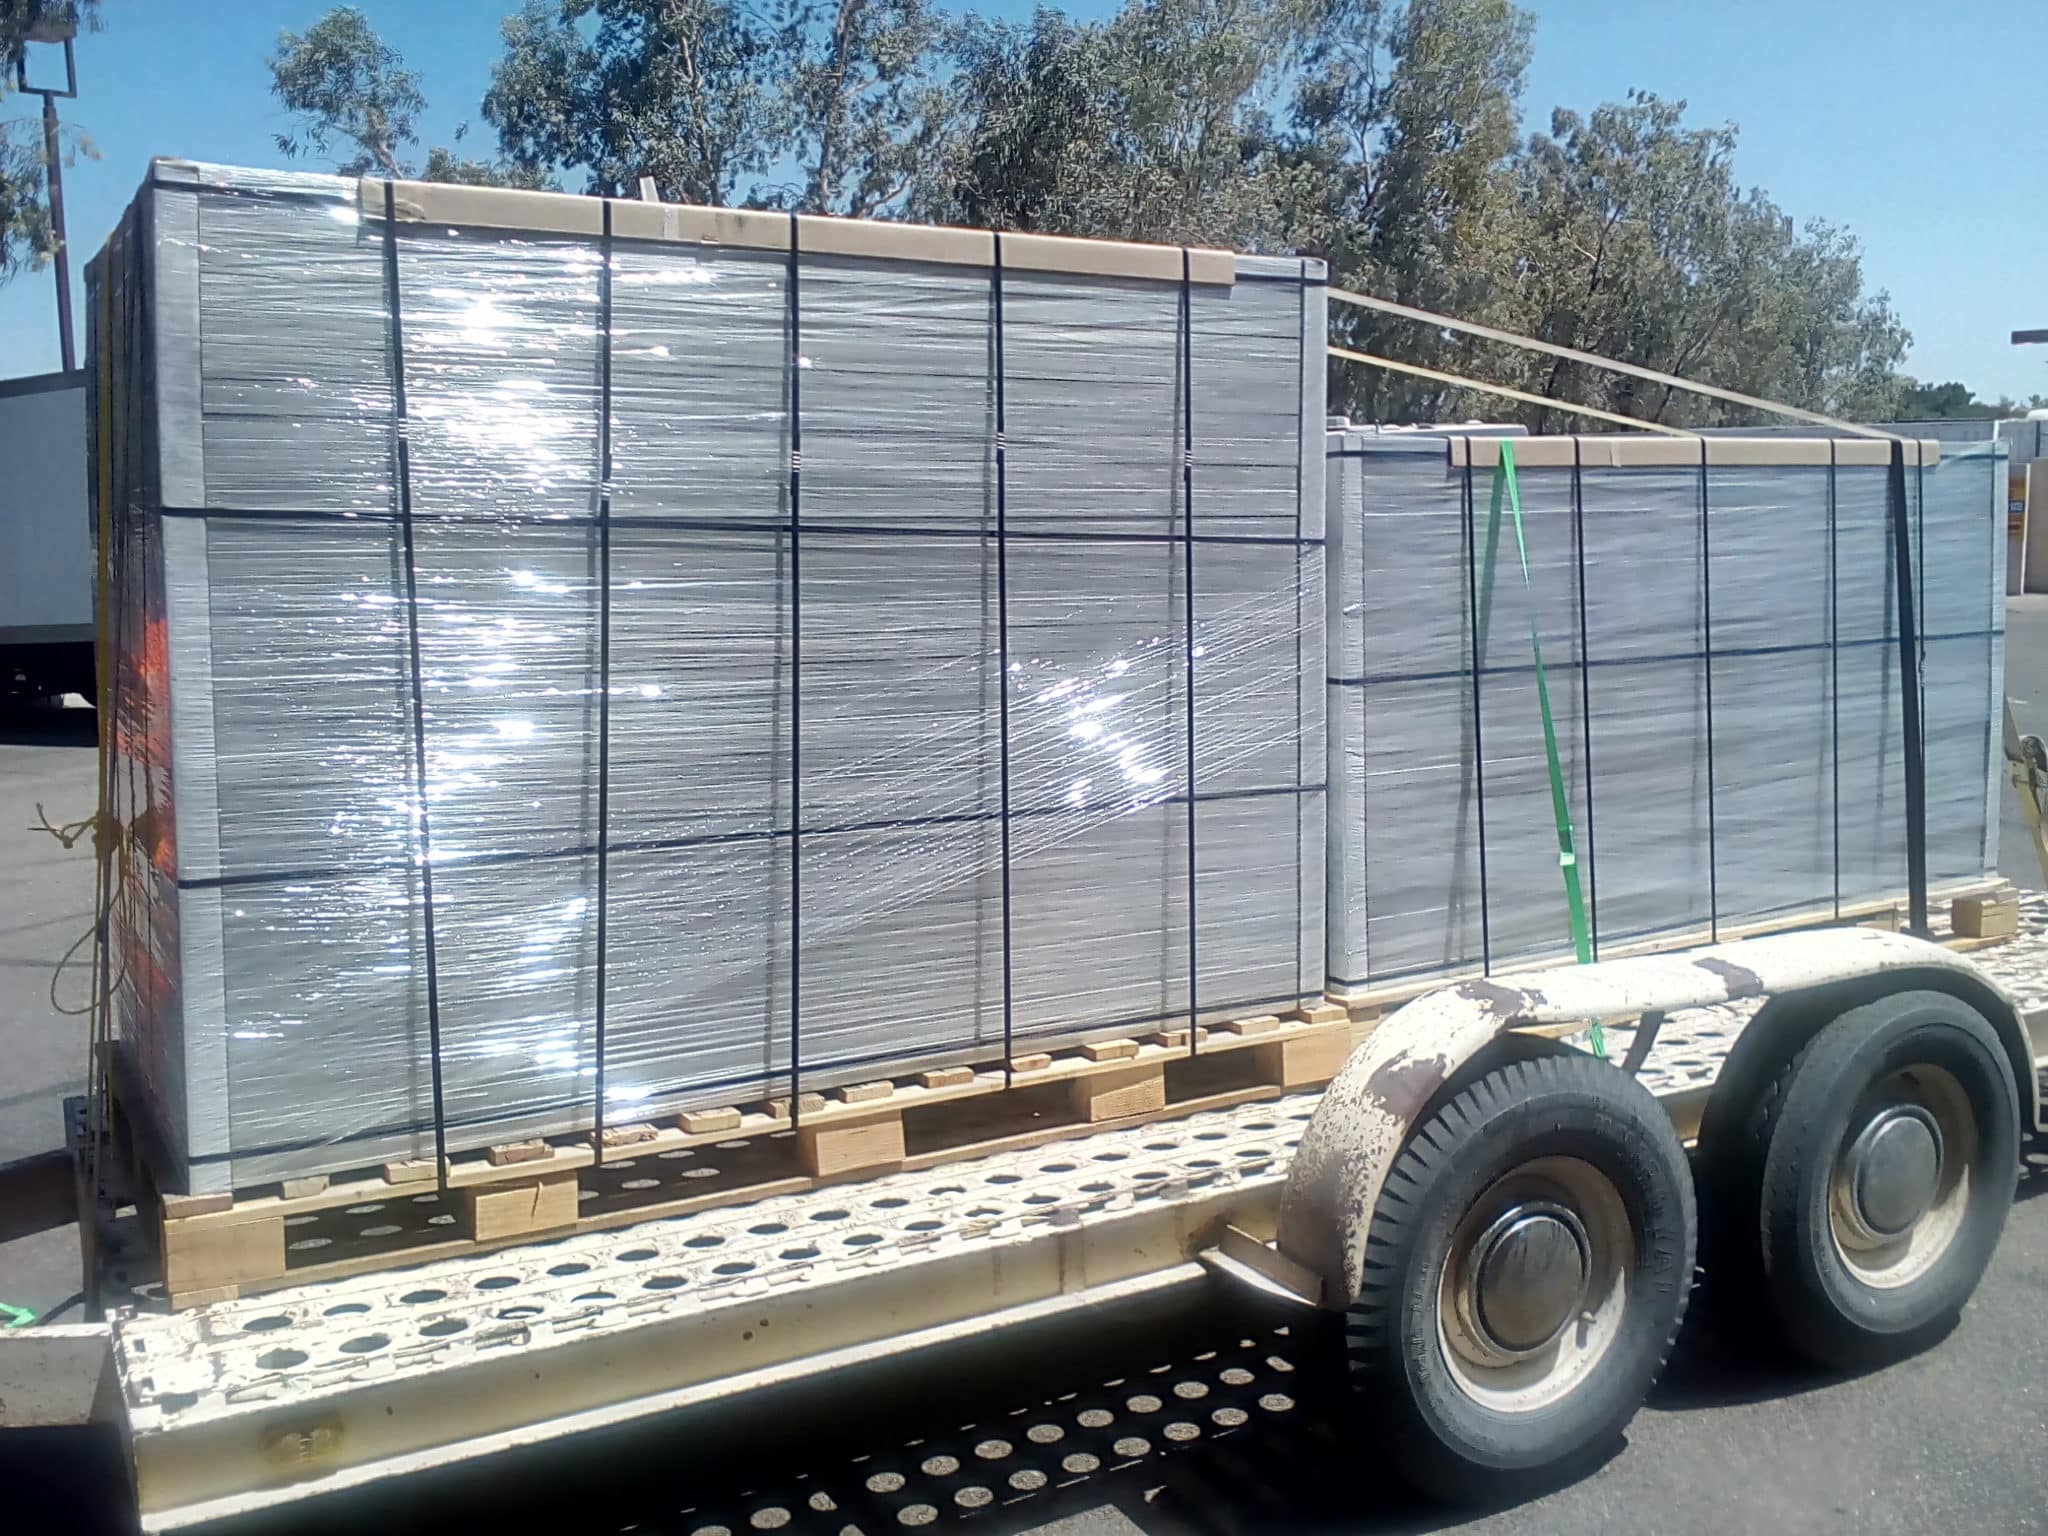 Close up large load of solar panels on trailer